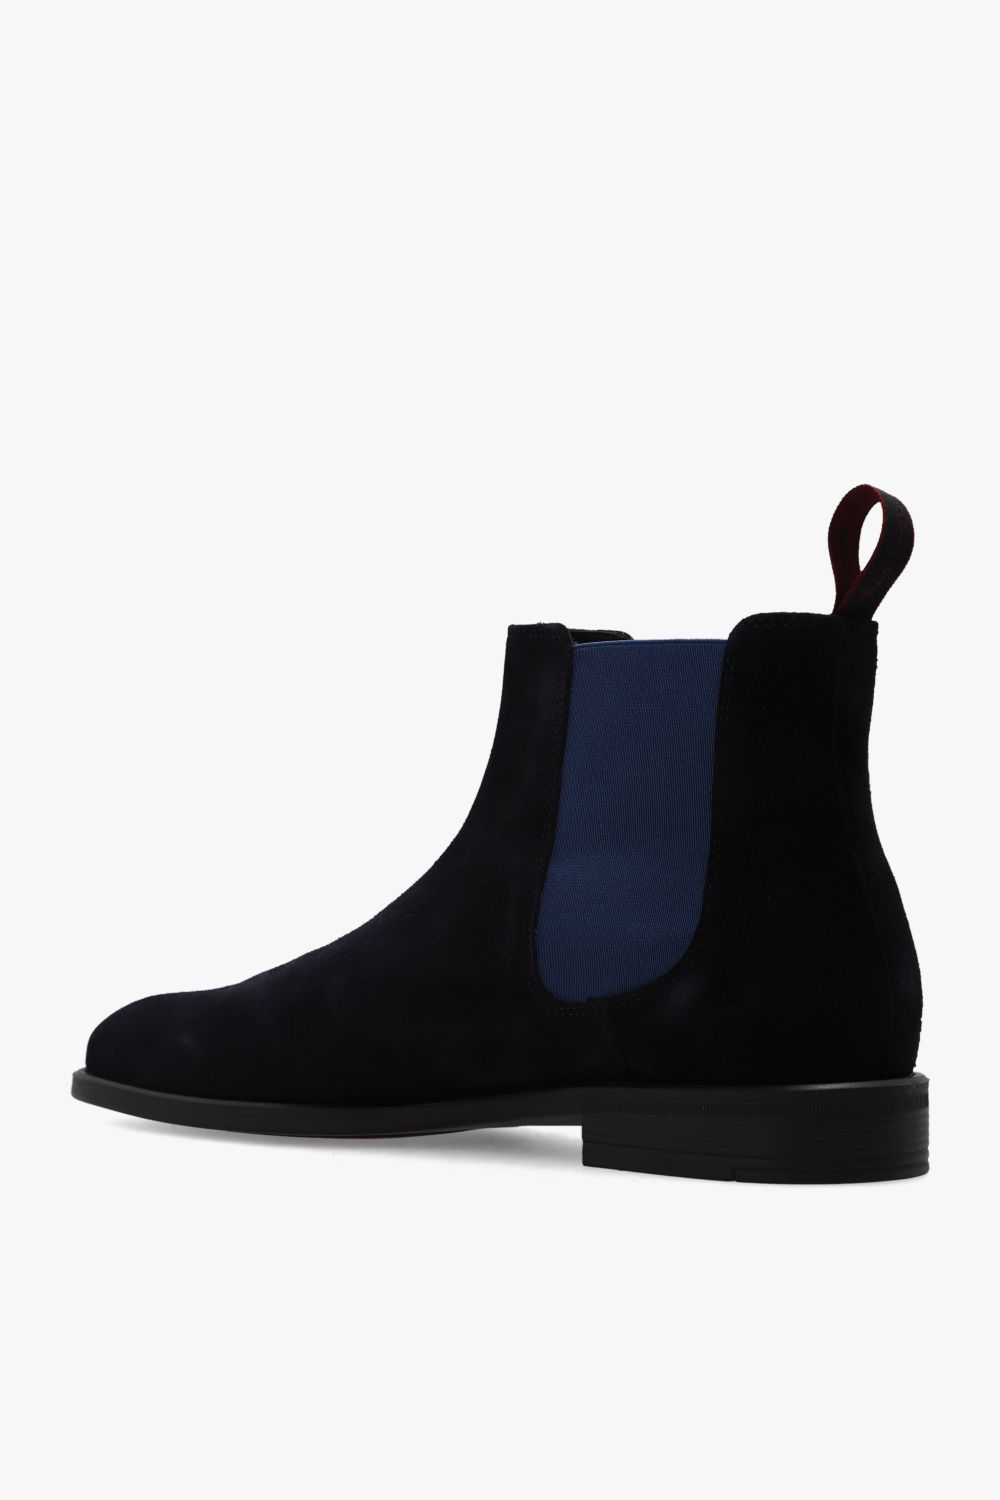 PS Paul Smith Leather Chelsea boots